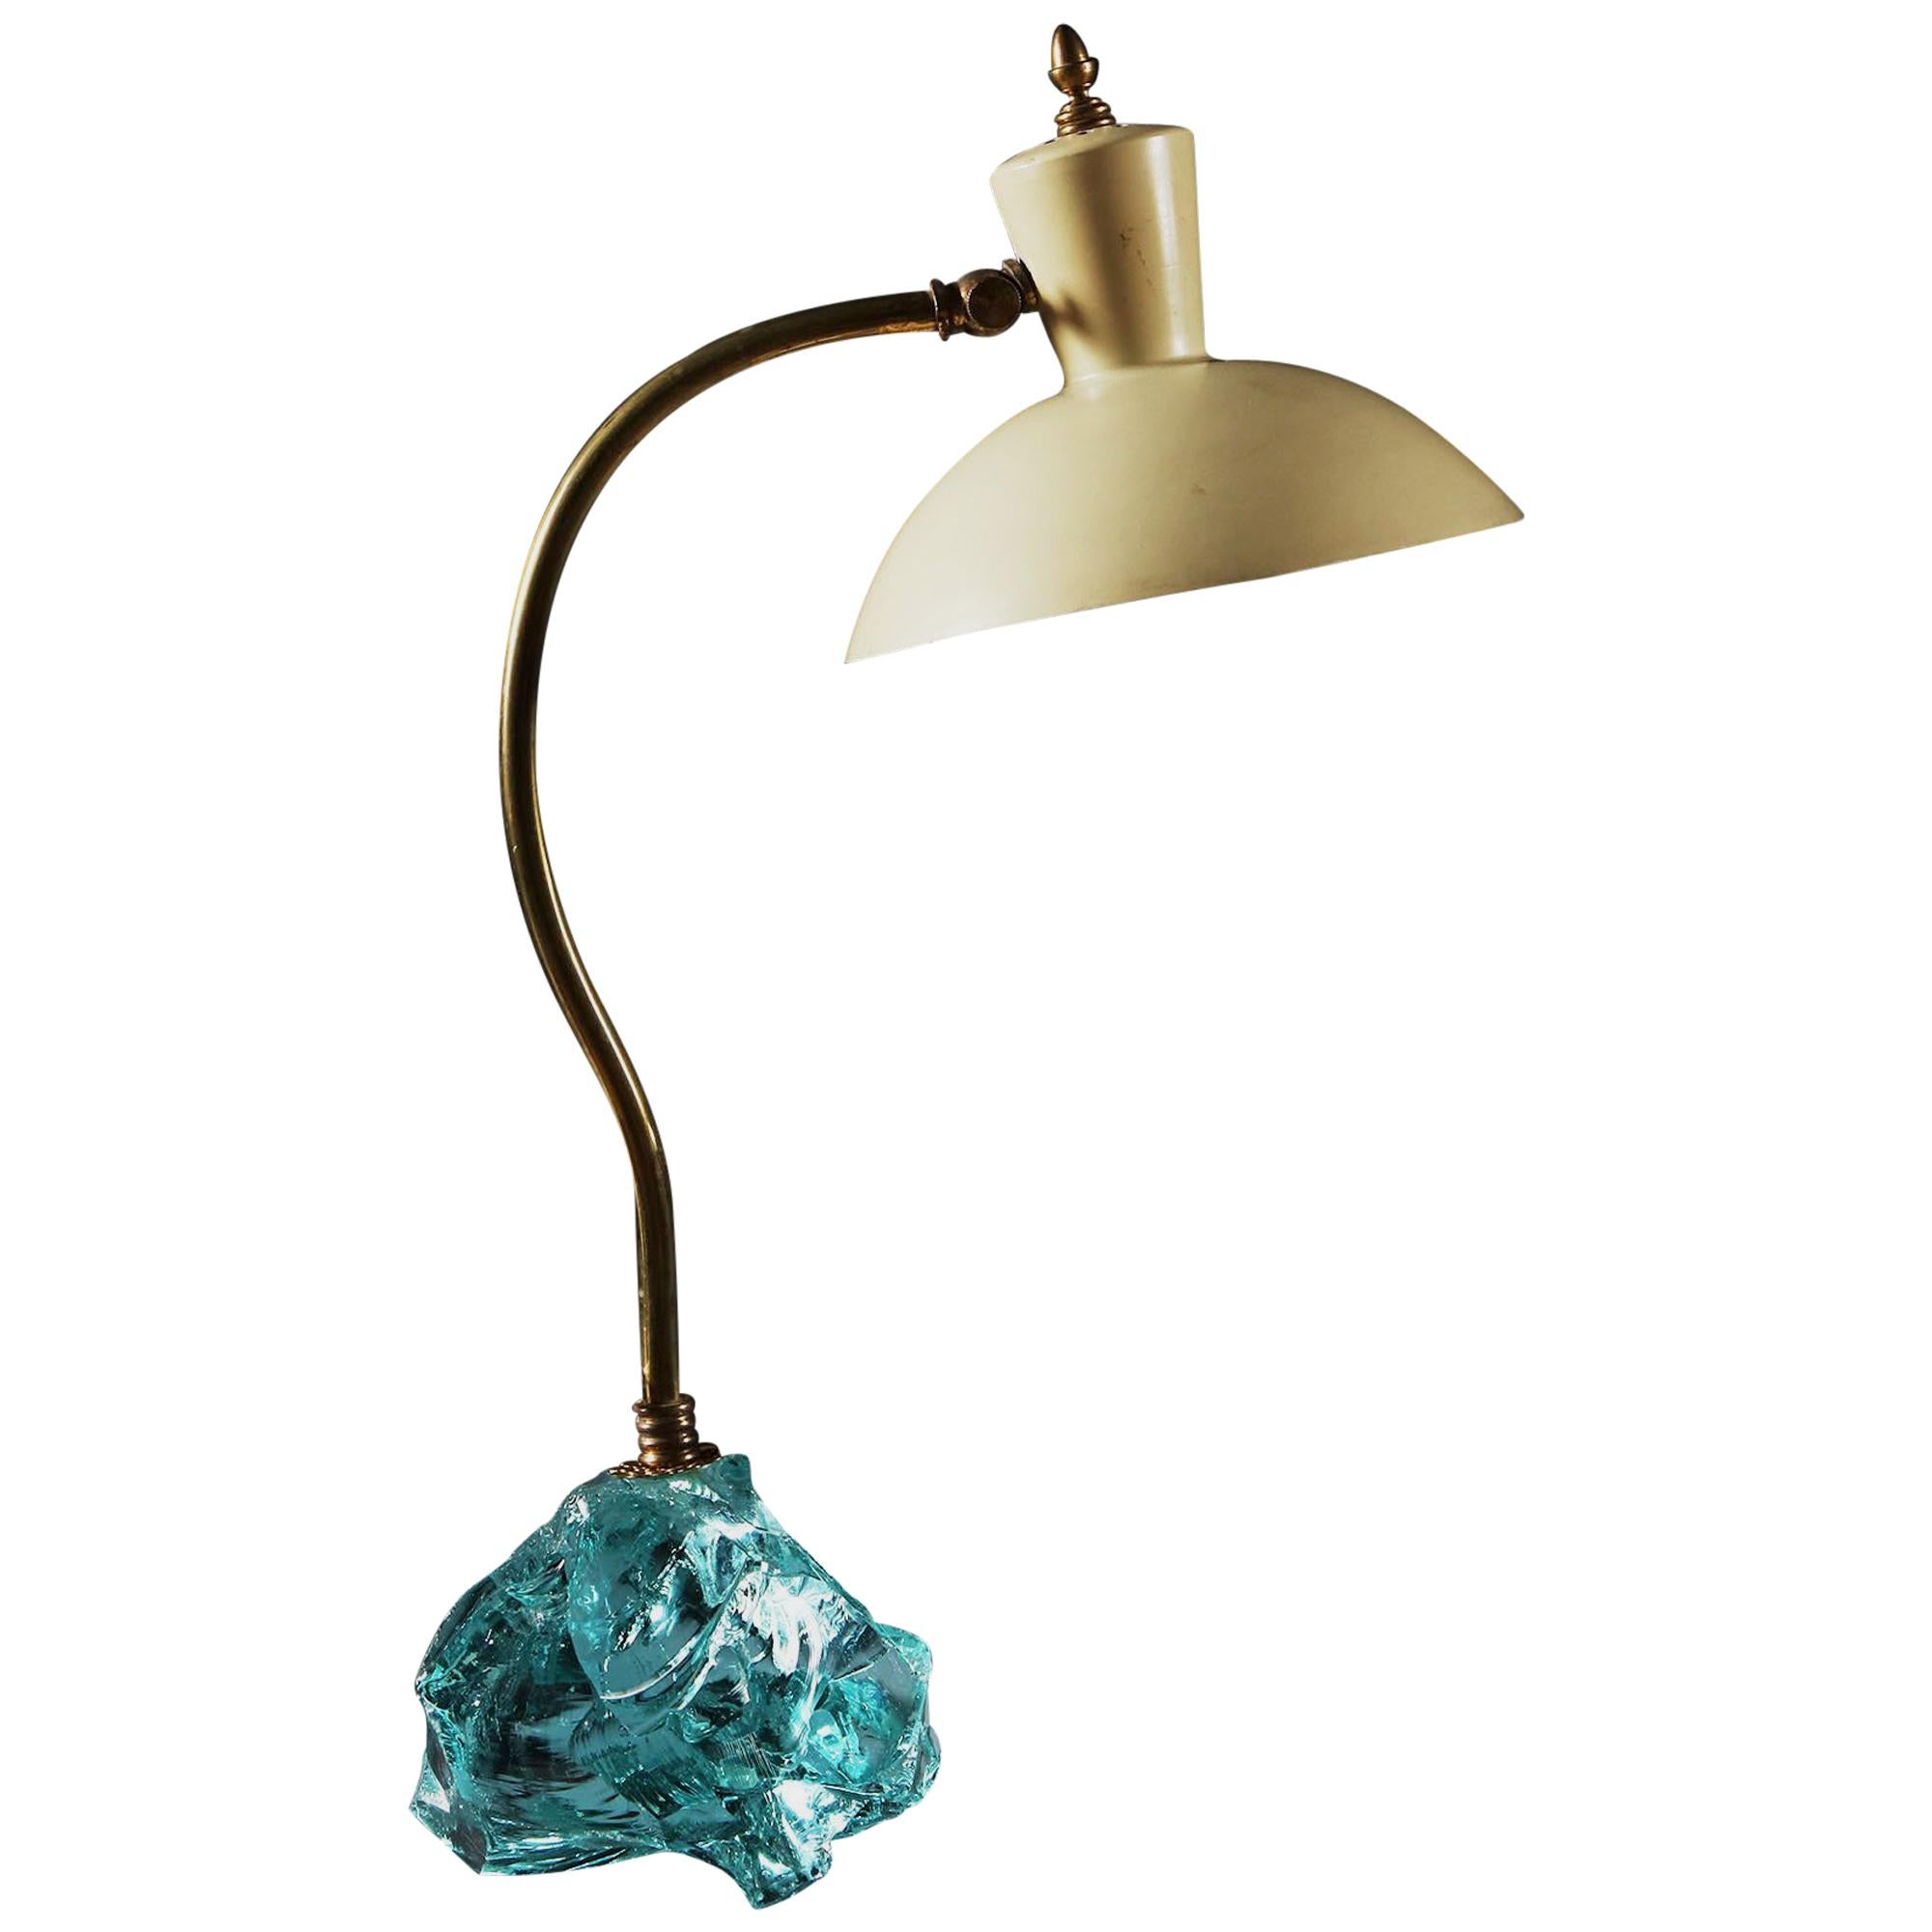 Mid-20th Century Italian Brass and Enamel Desk Lamp with Glass Shard Base